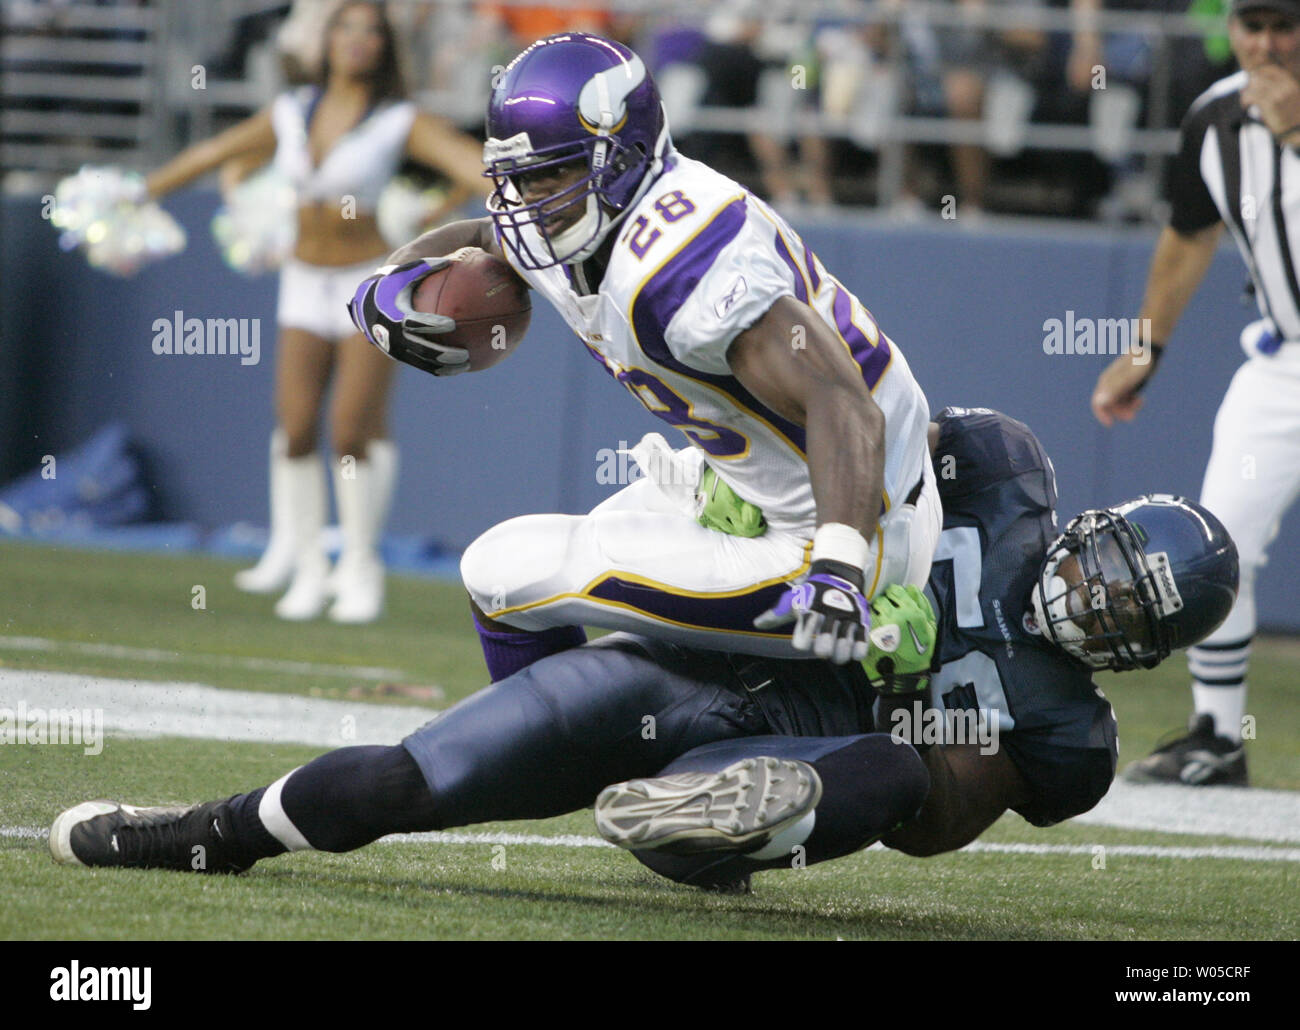 Minnesota Vikings running back Adrian Peterson is thrown for a two-yard loss by Seattle Seahawks' linebacker Leroy Hill in the first quarter of a pre season game on August 20, 2011 at CenturyLink Field in Seattle.  UPI /Jim Bryant Stock Photo